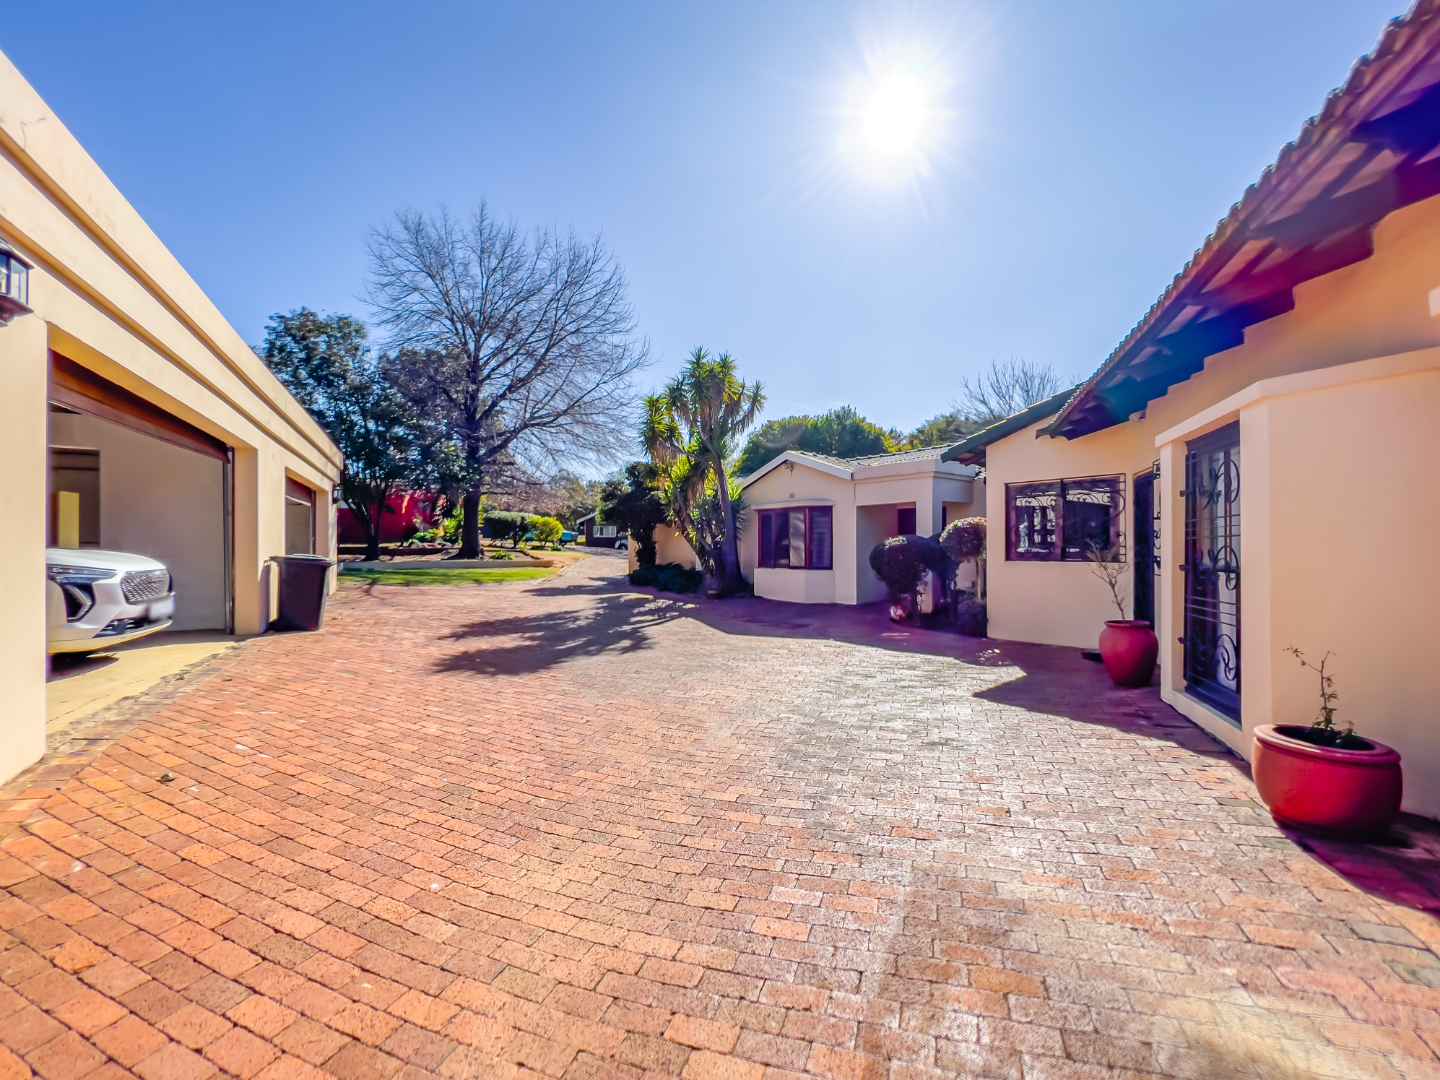 0 Bedroom Property for Sale in North Riding AH Gauteng